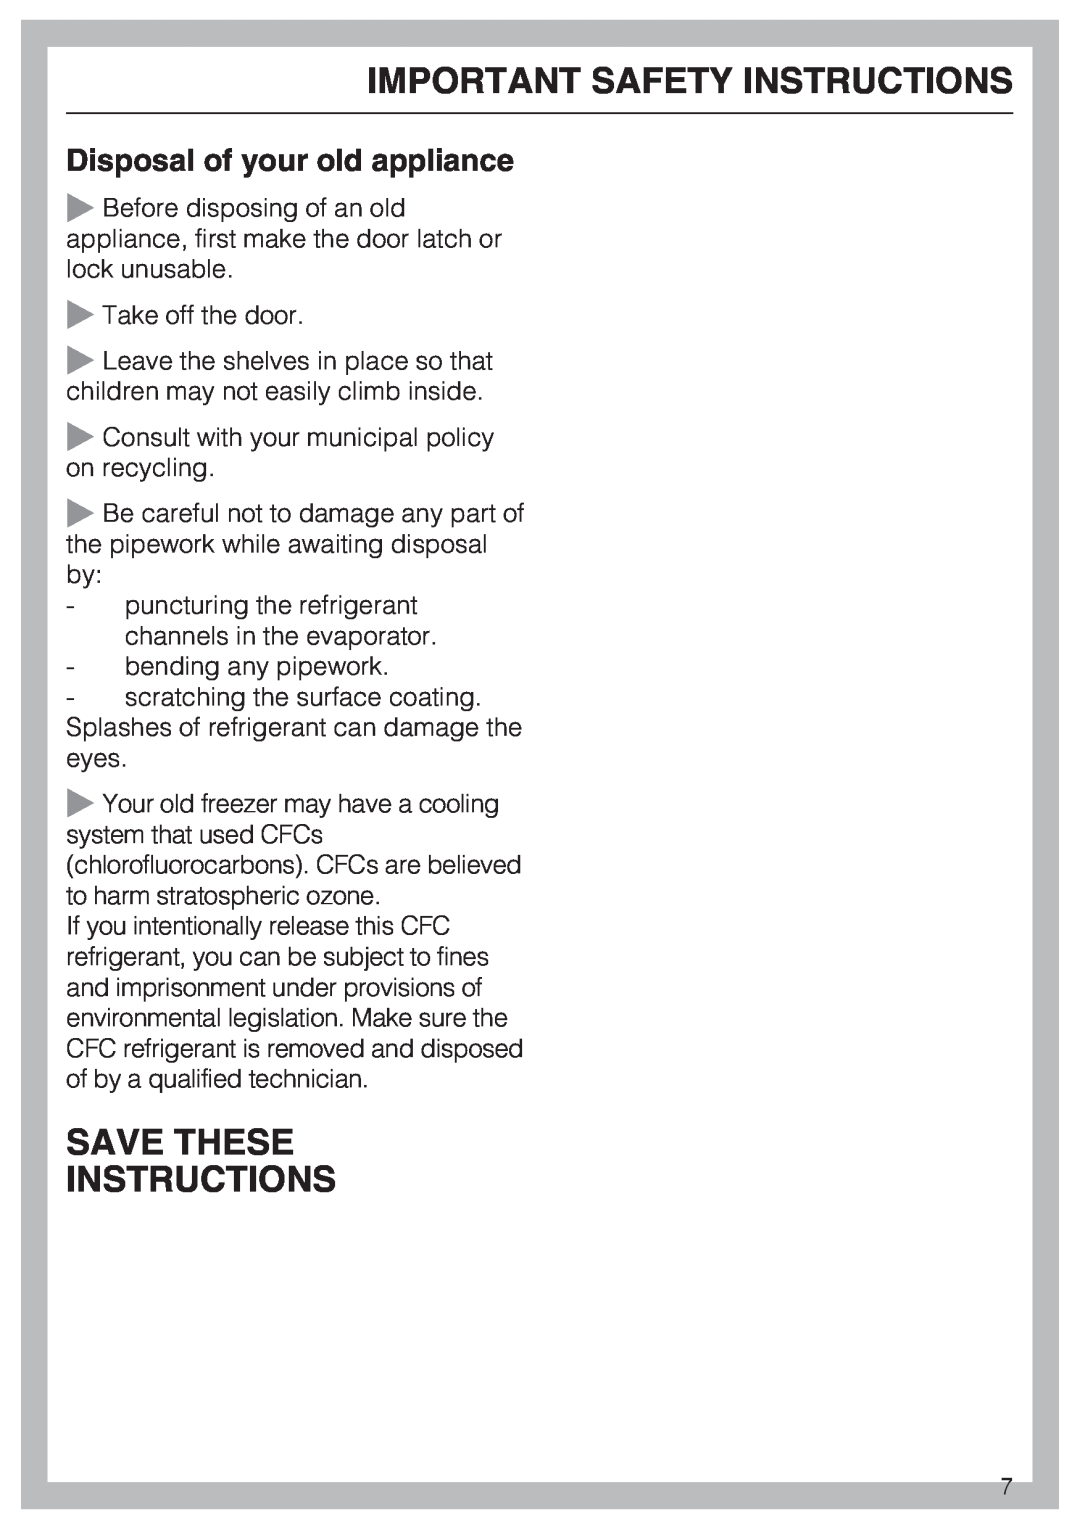 Miele F 1911 SF, F 1811 SF Save These Instructions, Disposal of your old appliance, Important Safety Instructions 